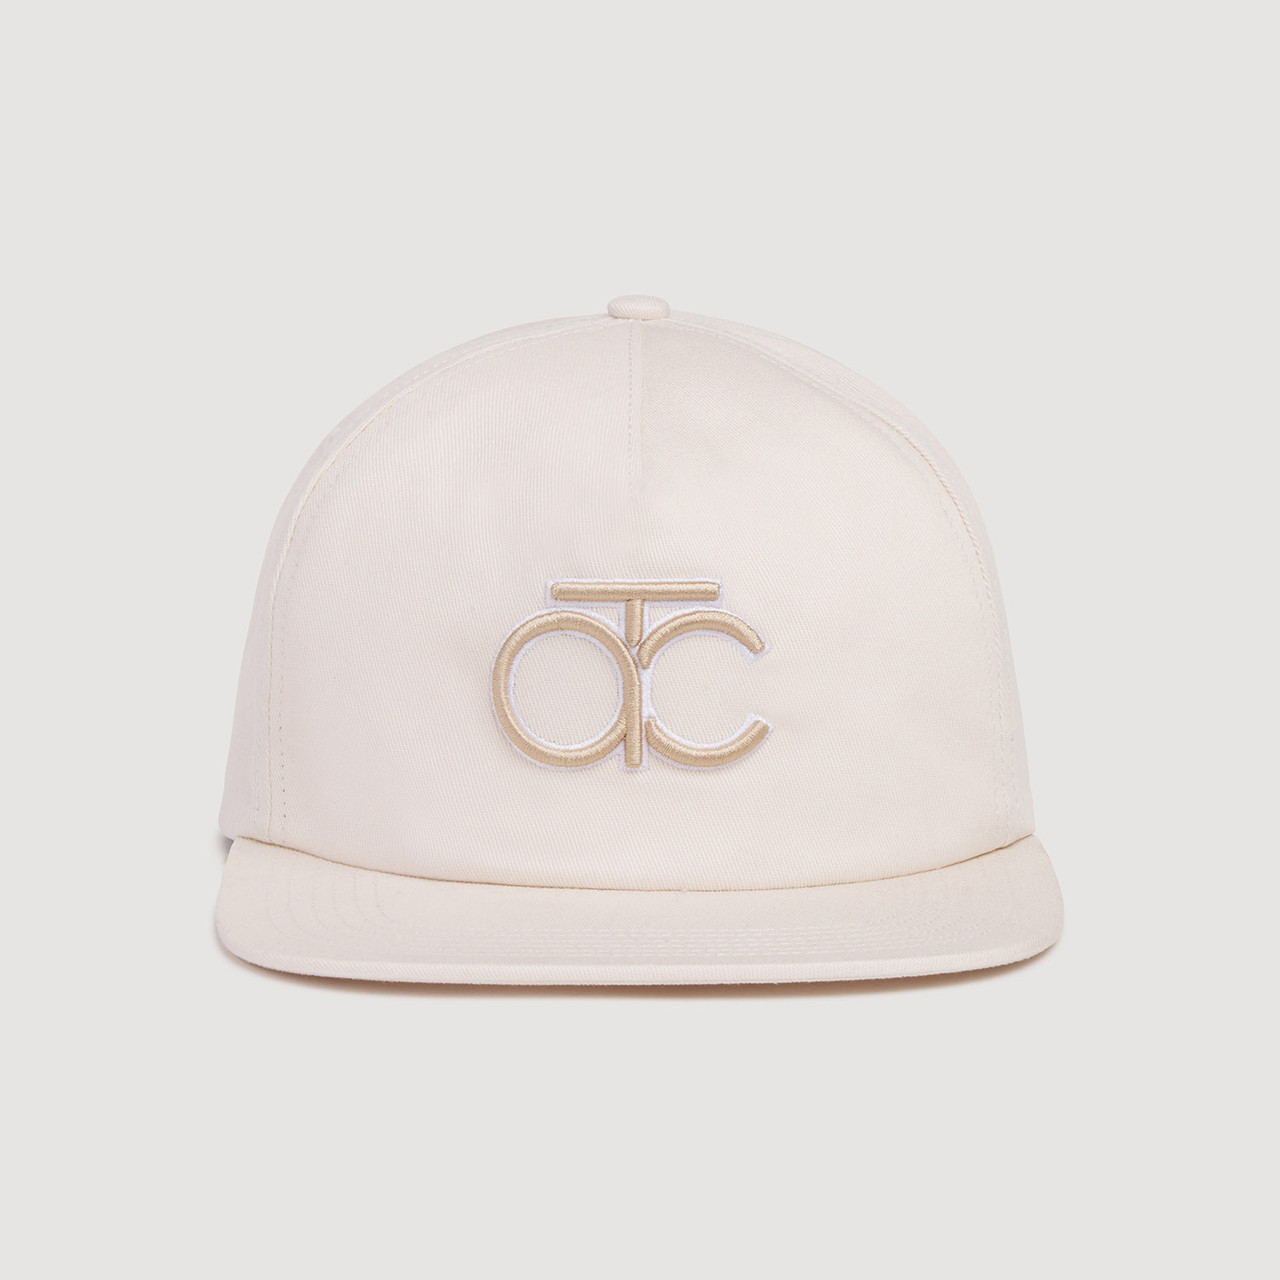 Cream with Tan Unstructured Cap with embroidered Actuate motif